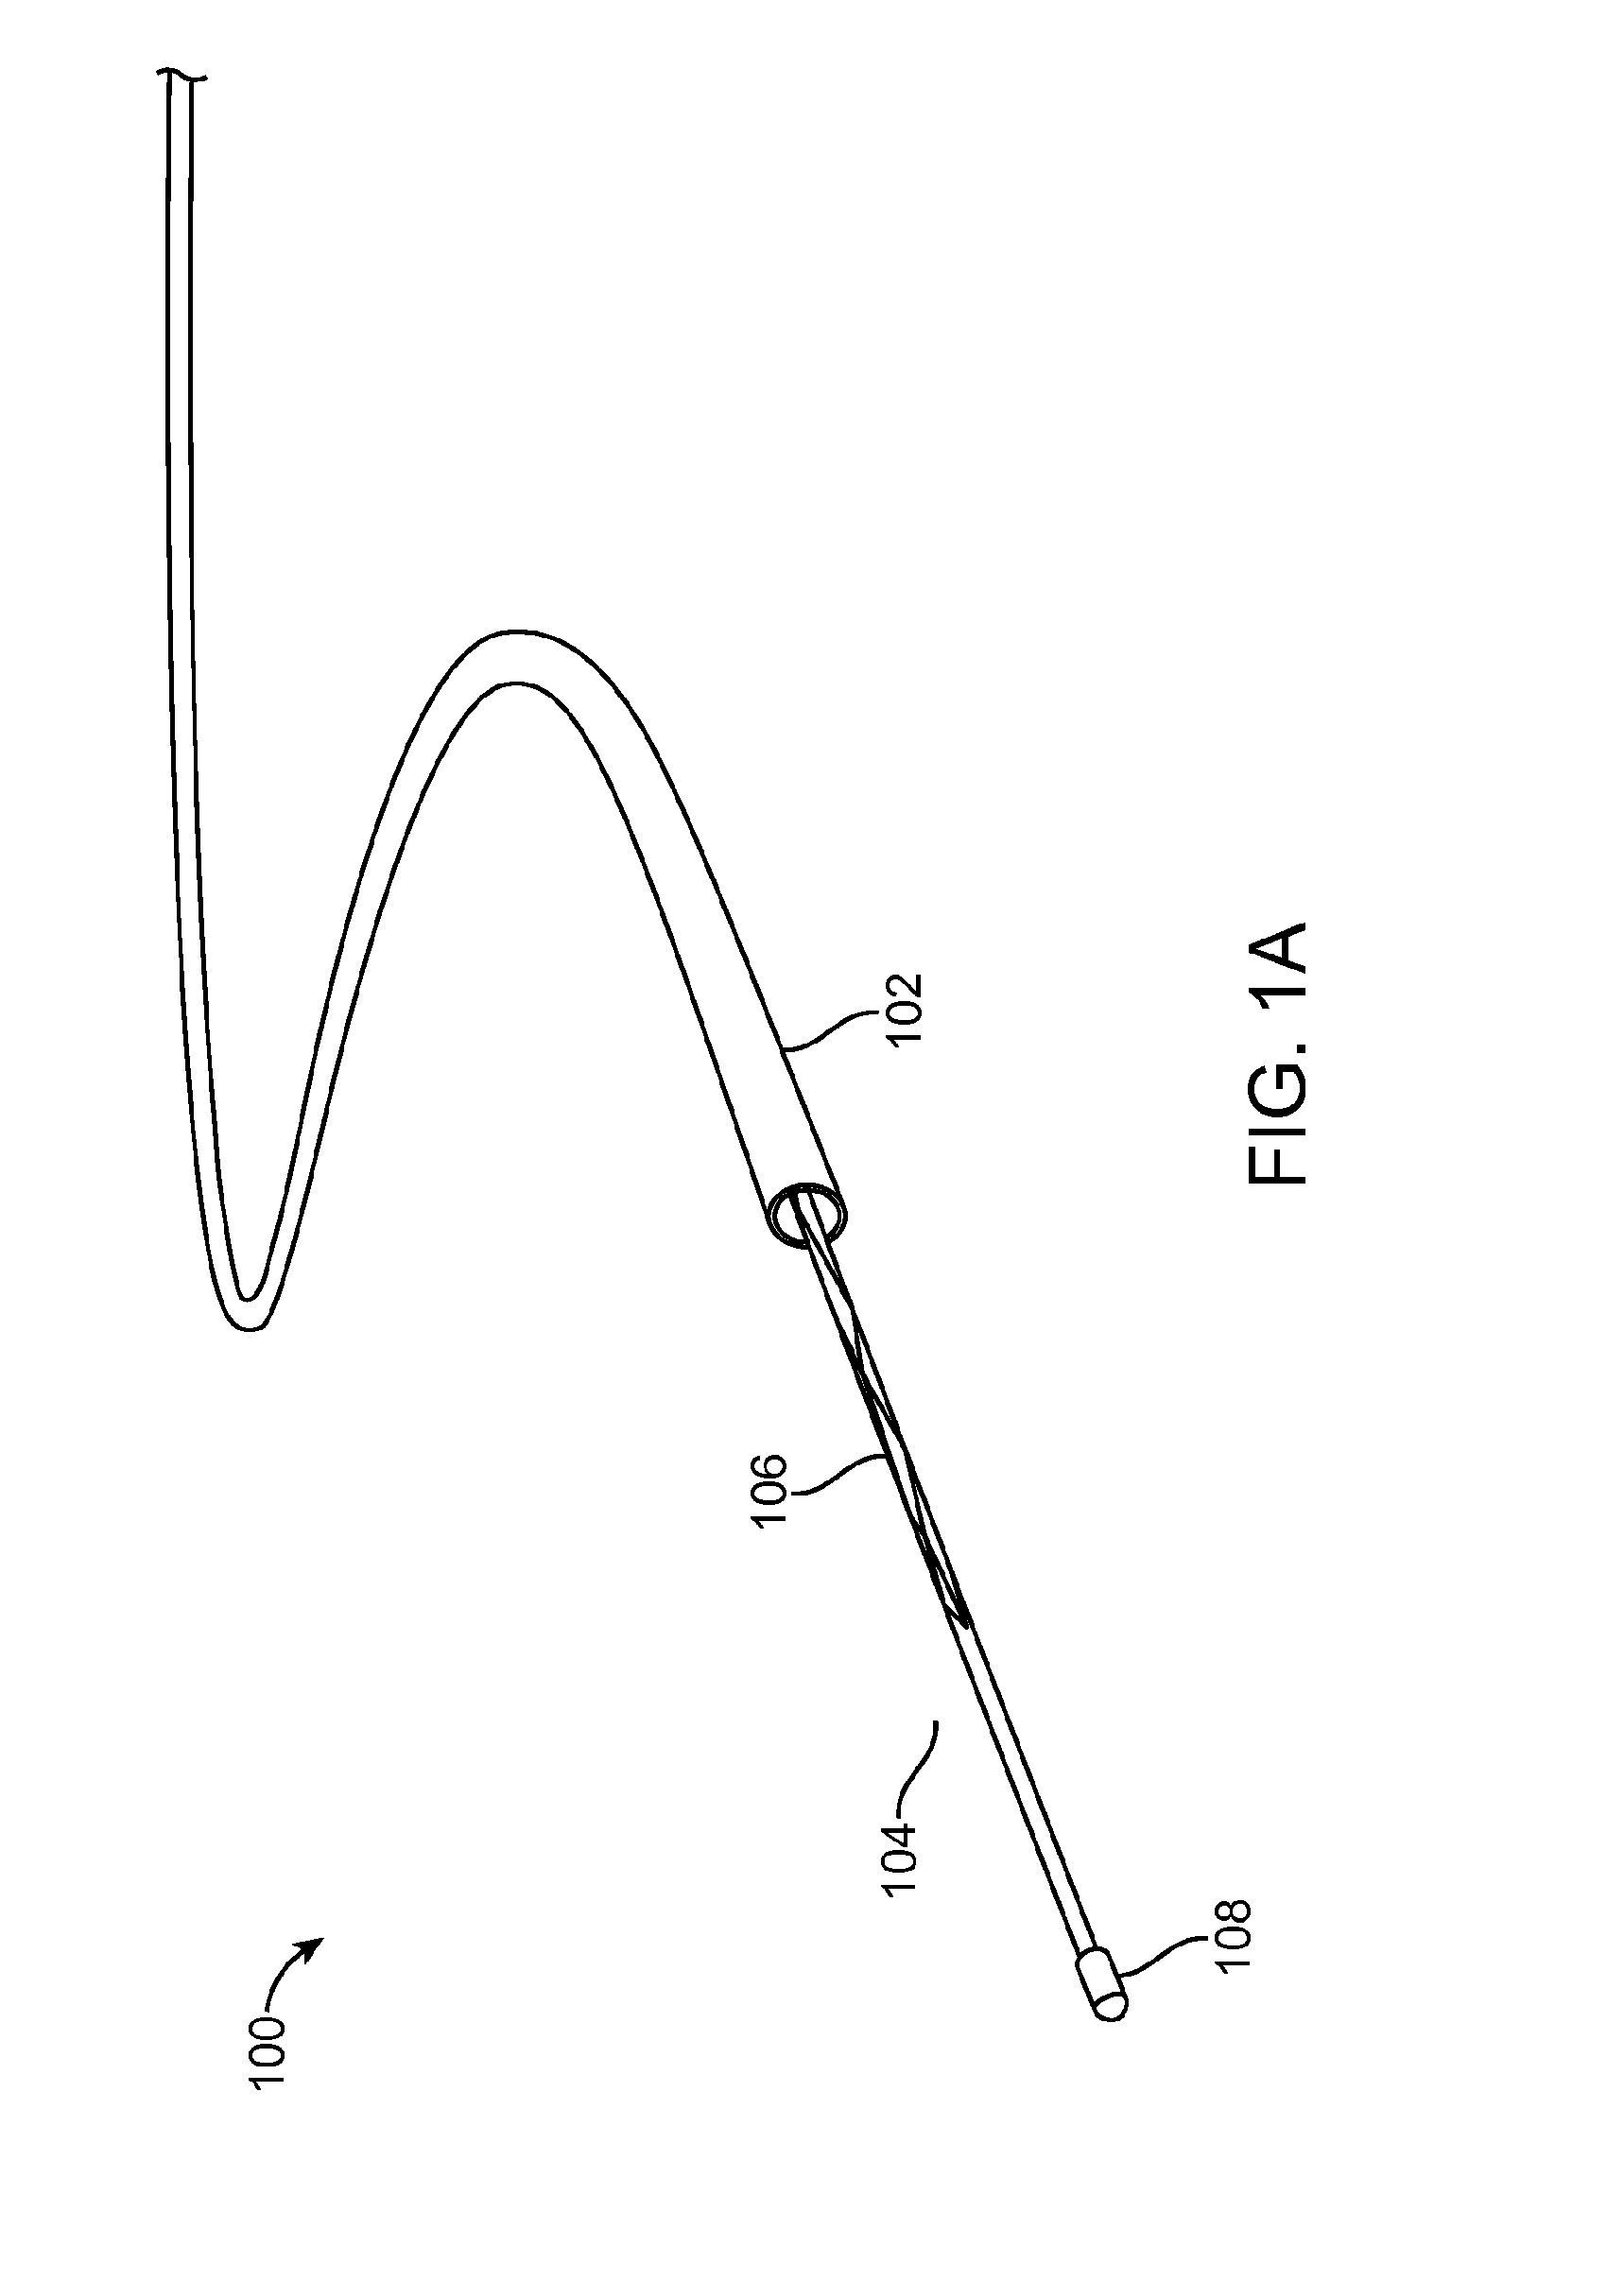 Device and method for bridging a neck of an aneurysm